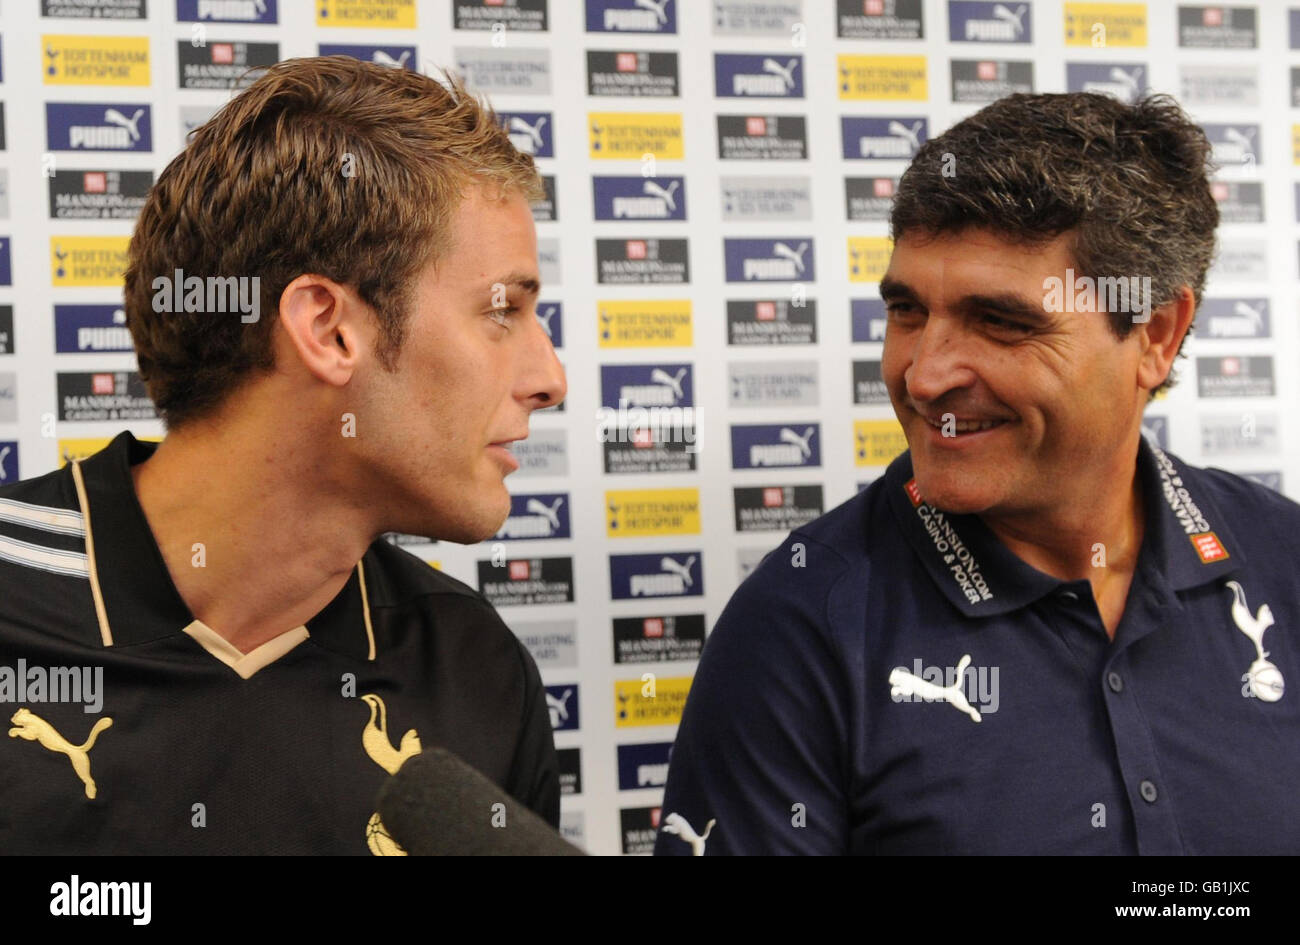 Soccer - Tottenham Hotspur Press Conference - Spurs Lodge. Tottenham Hotspur manager Juande Ramos (right) with his new signing David Bentley during a press conference at Spurs Lodge, Chigwell. Stock Photo